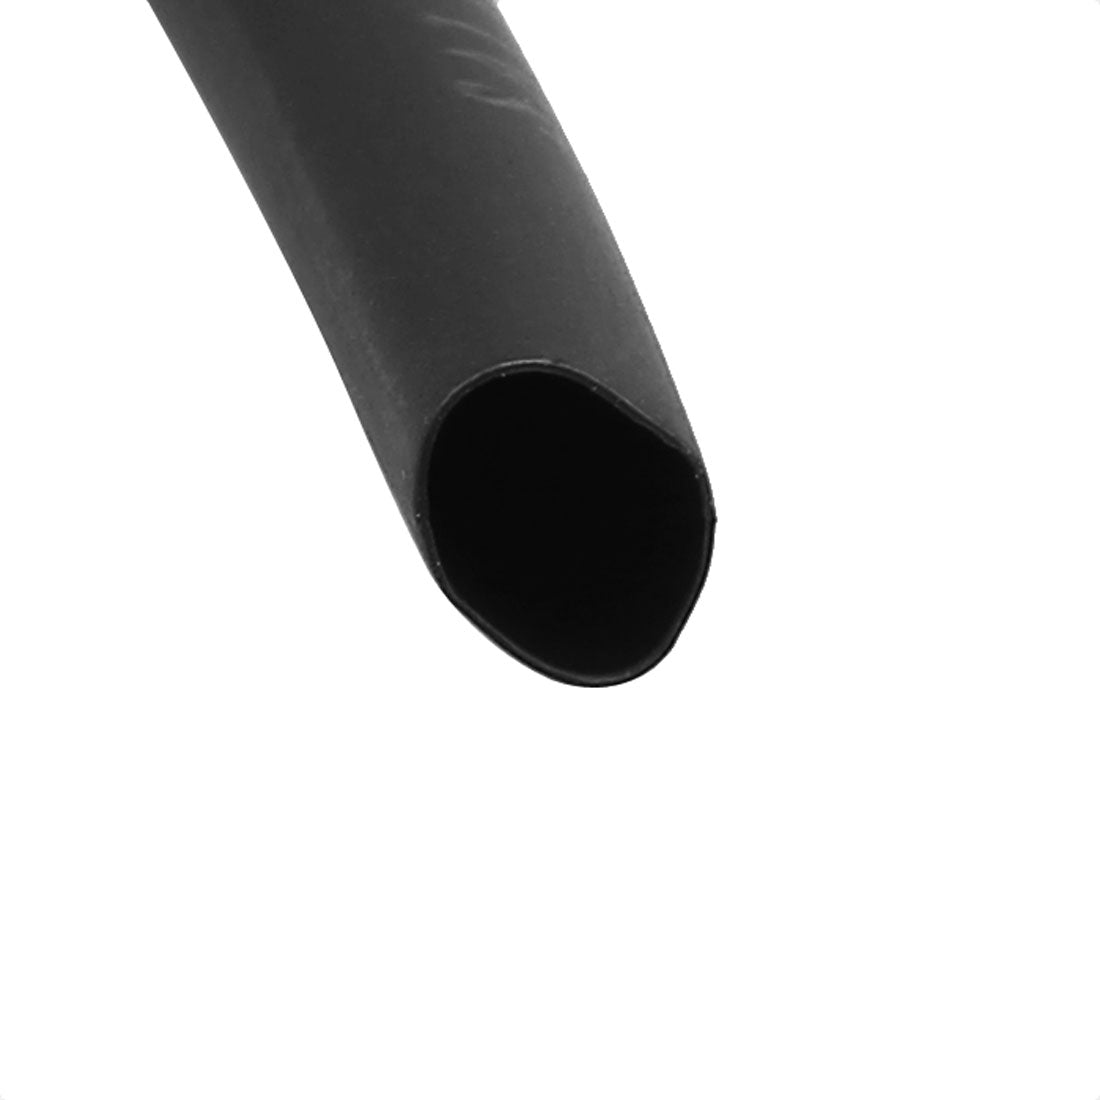 uxcell Uxcell 5mm Dia 2:1 Heat Shrink Tubing Tube Sleeving Wire Cable Black 10M Length